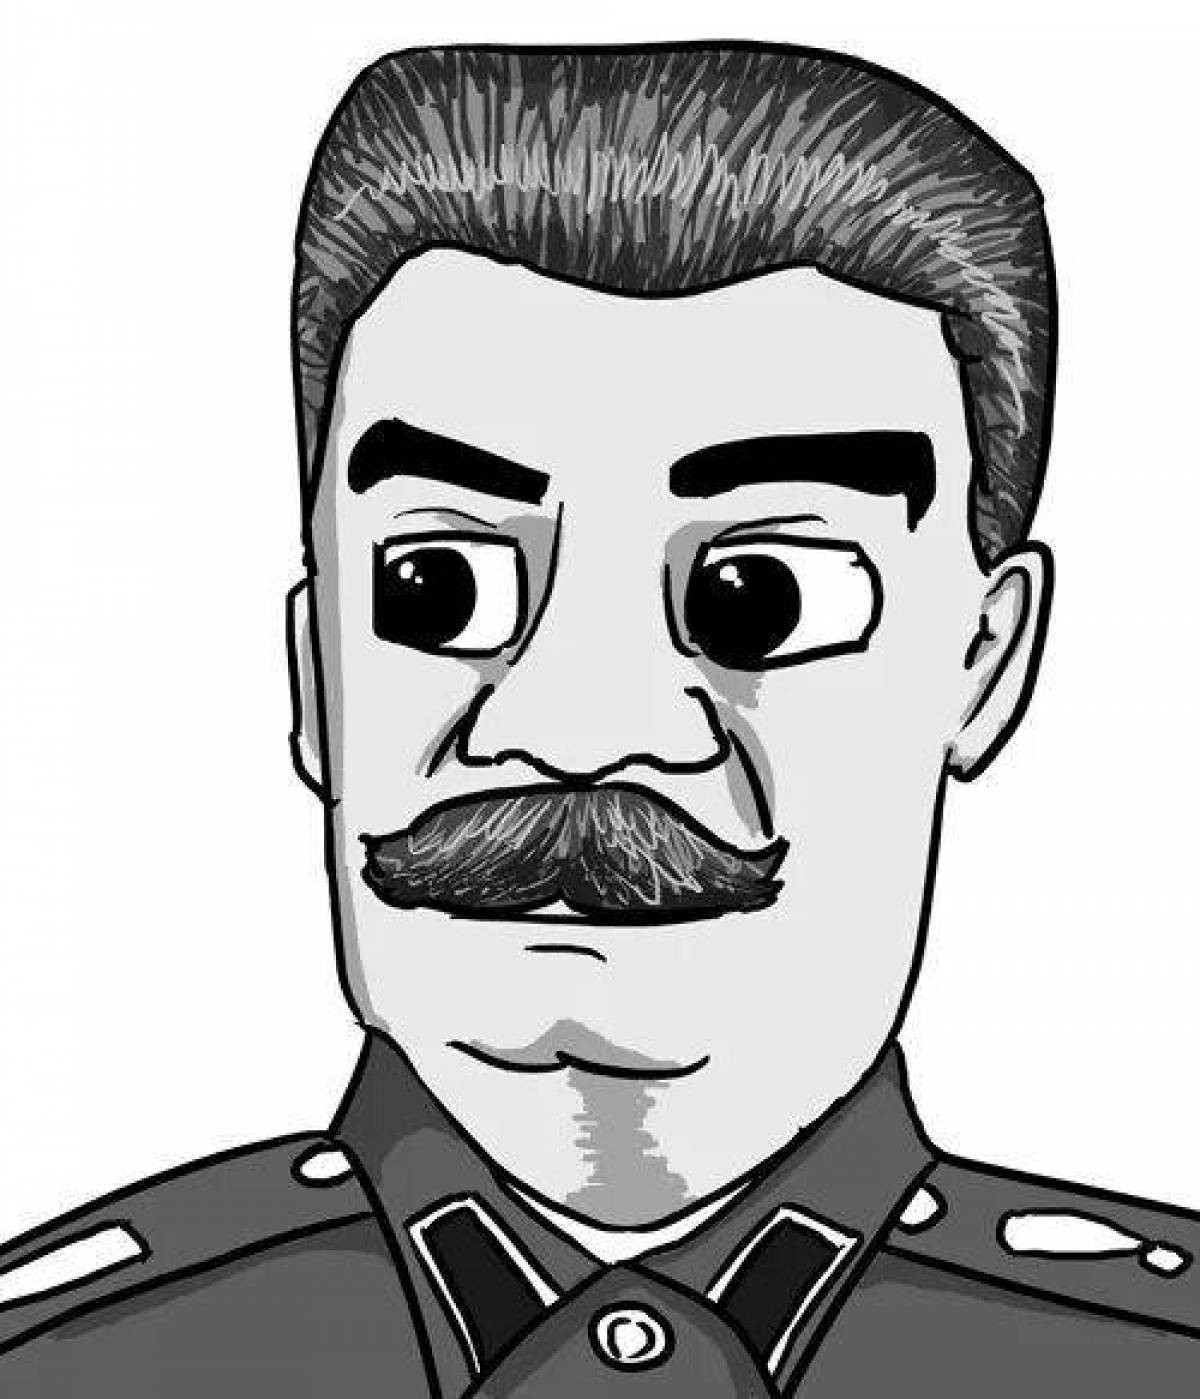 Delightful coloring of stalin